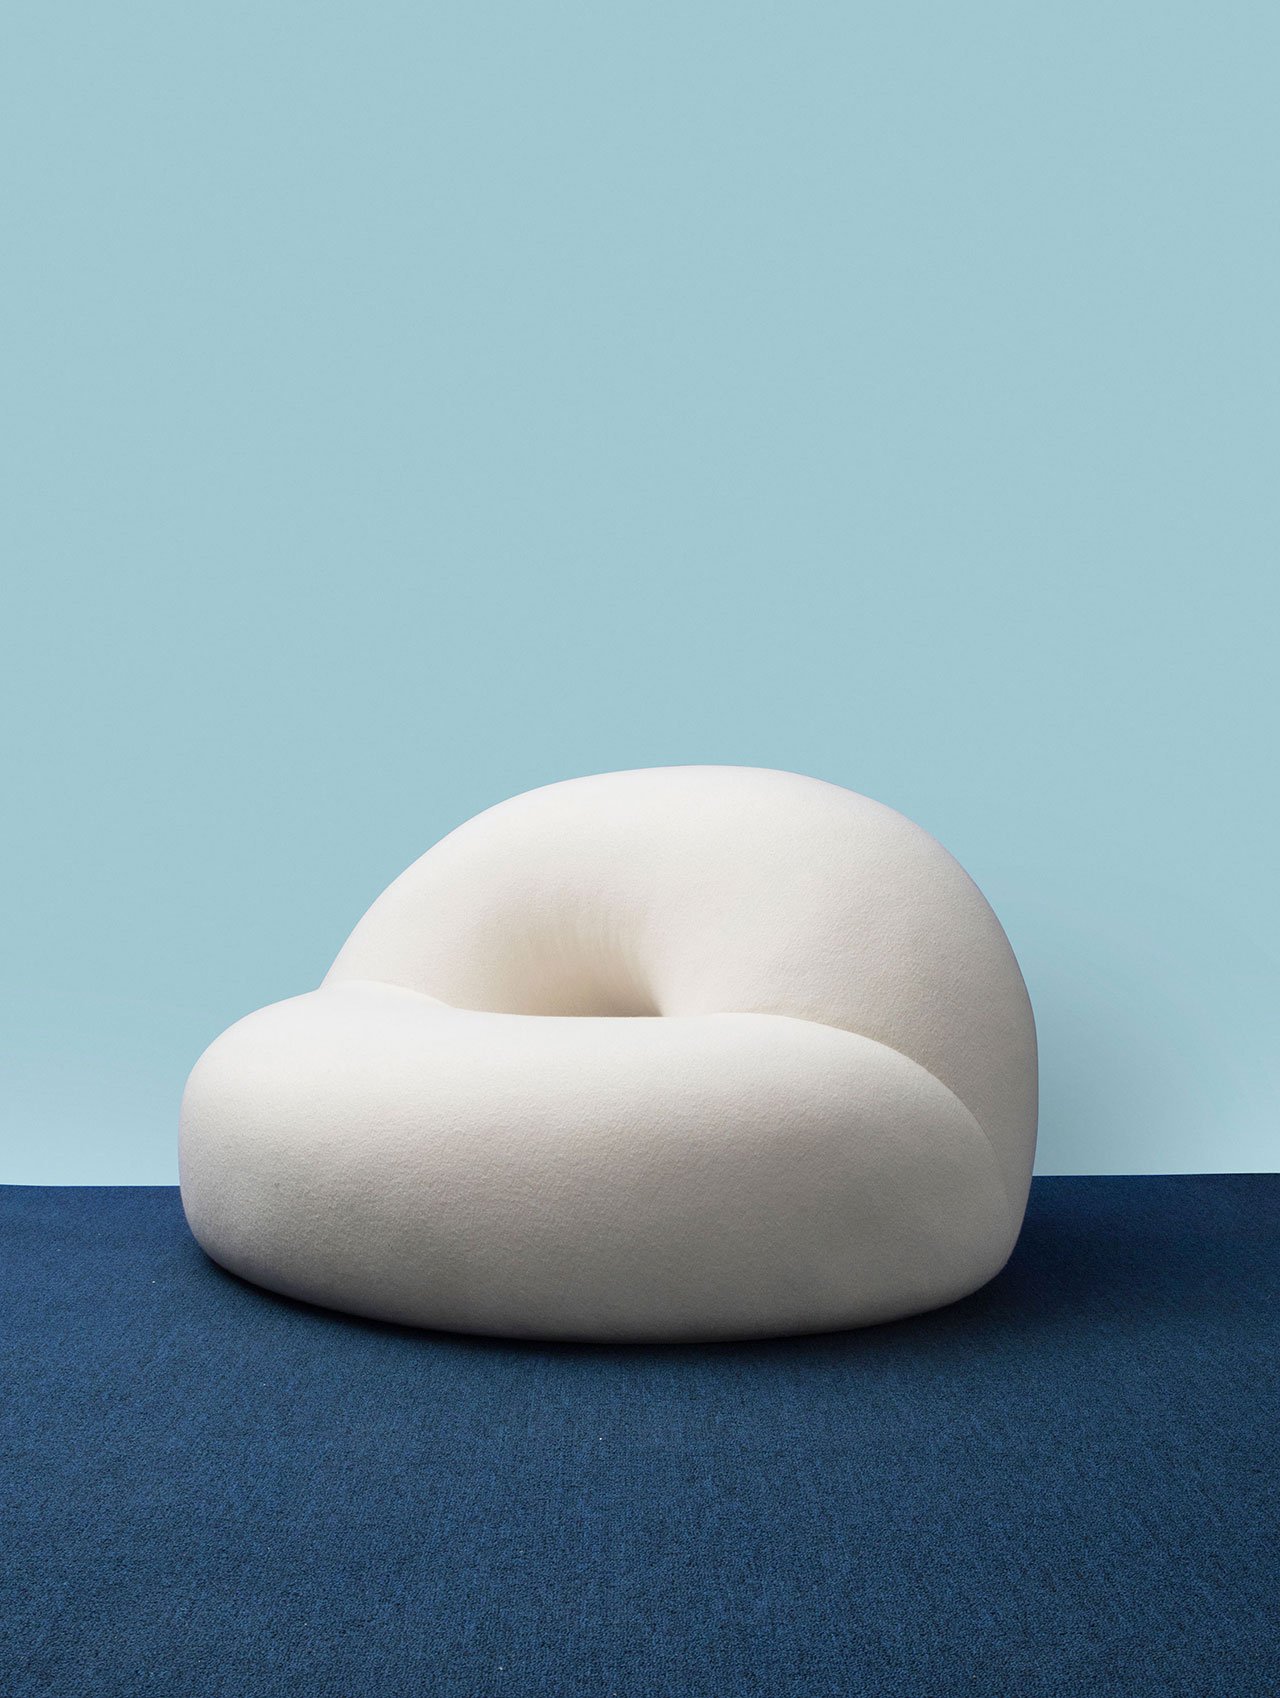 Objects of Common Interest, Tube Chair in collaboration with Falke Svatun, 2018. Chair Foam, Fabric. Photo by Charlie Schuck.